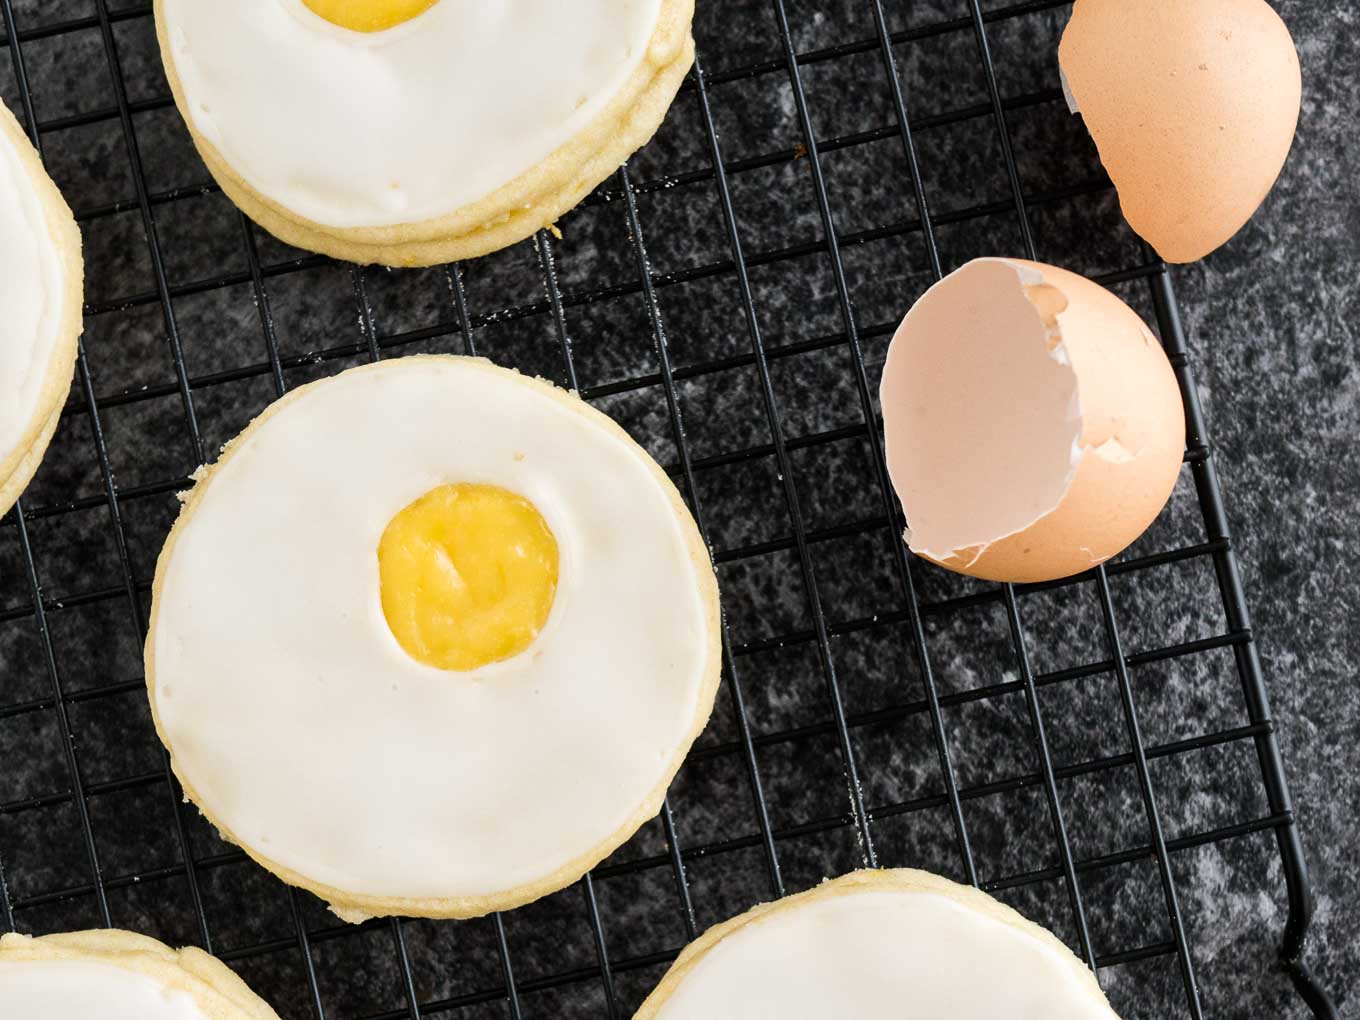 Several easter sugar cookies with lemon curd (resembling a sunny side up egg) on a black cooling rack with some eggshells next to it.